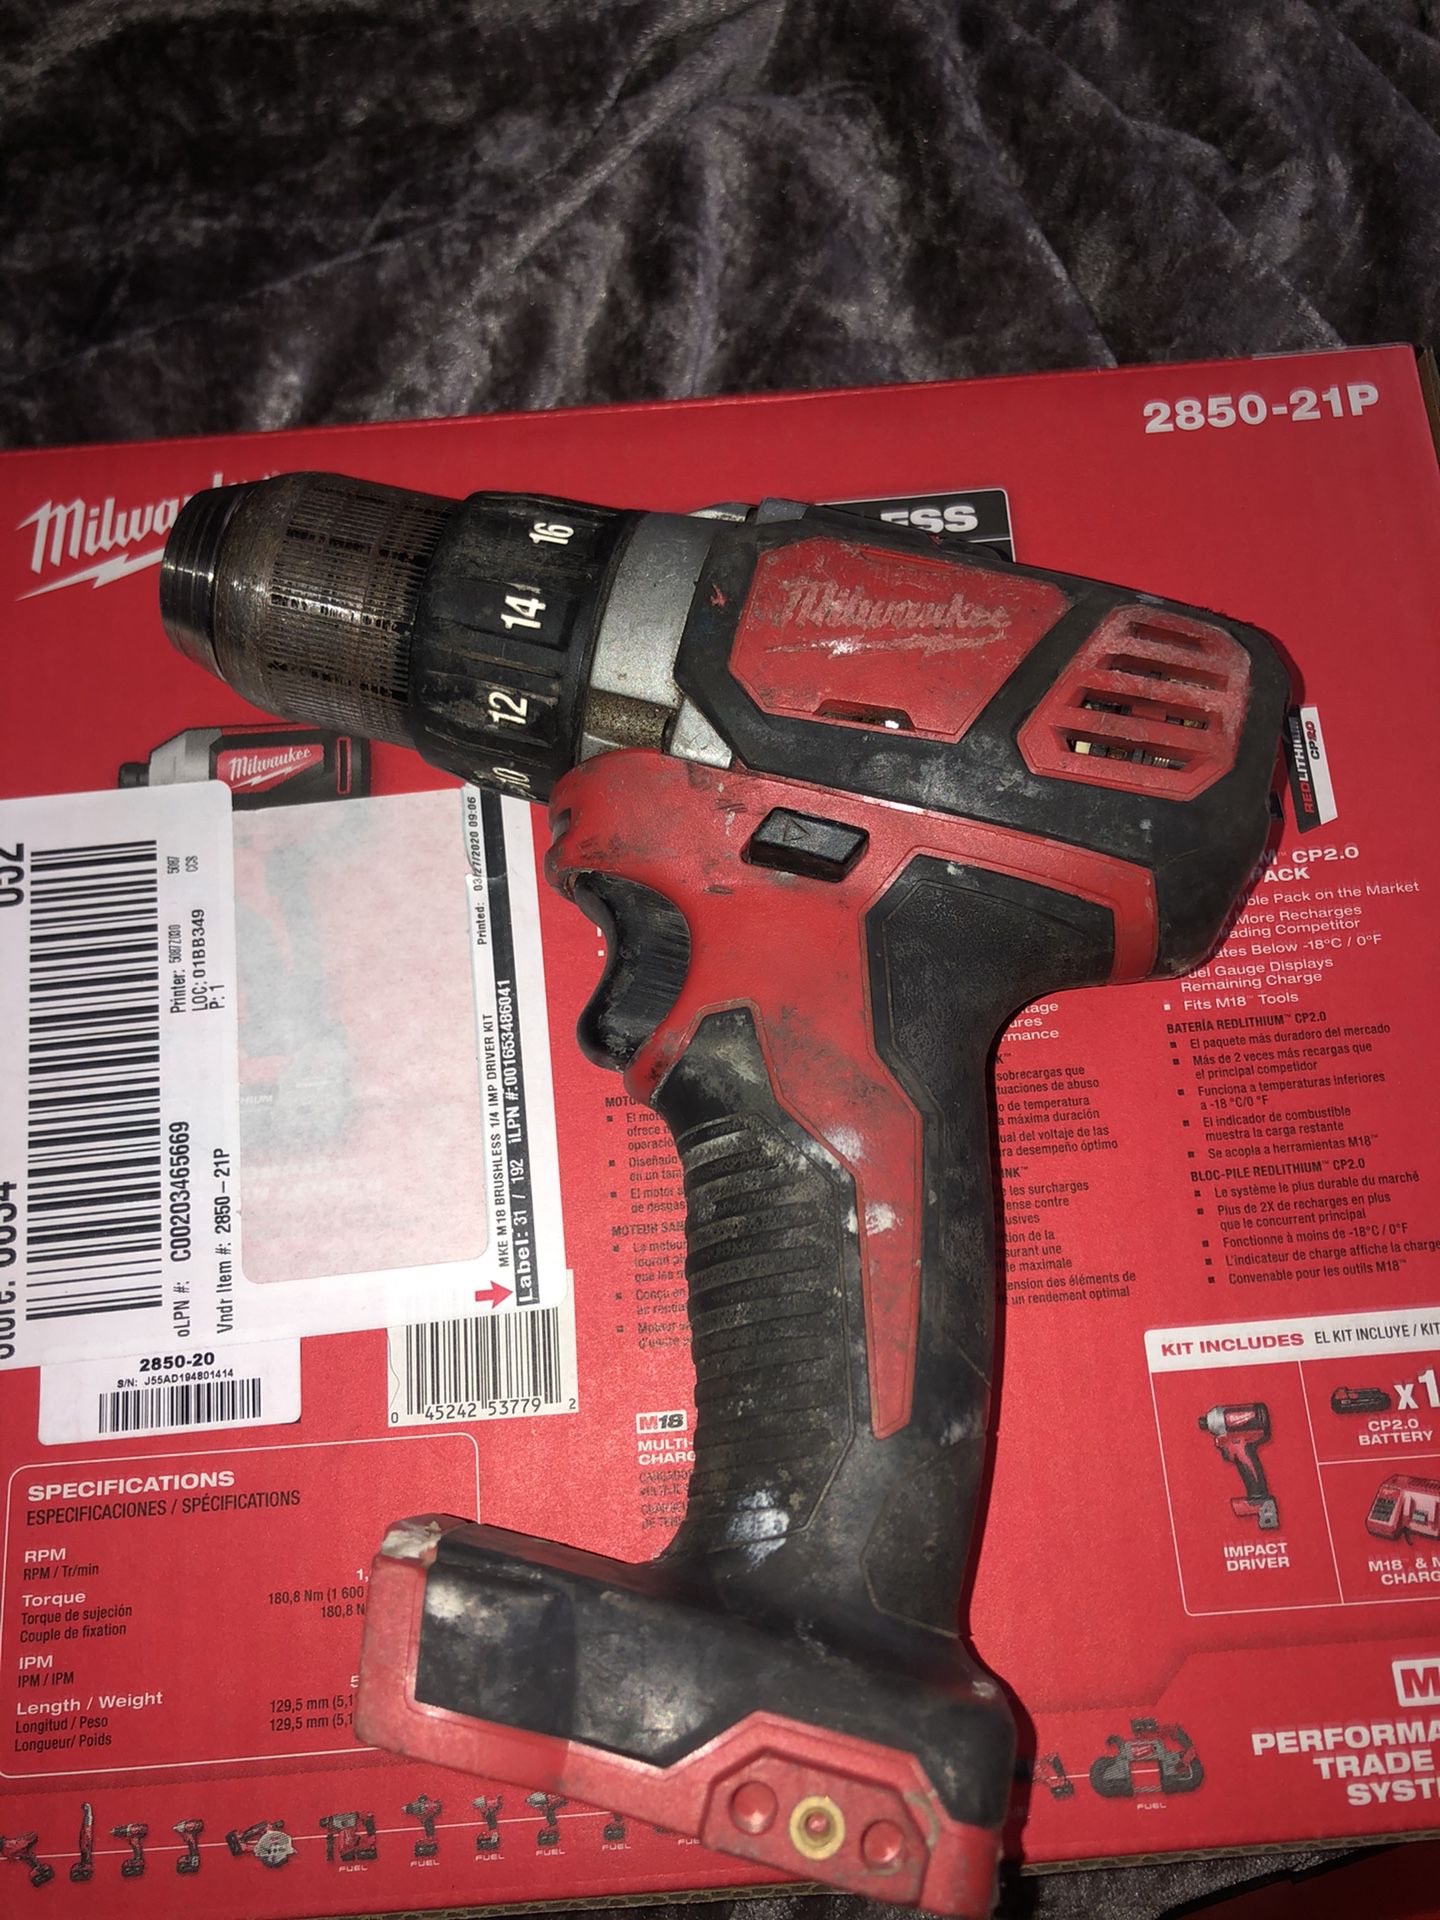 Milwaukee drill / impact driver / and battery